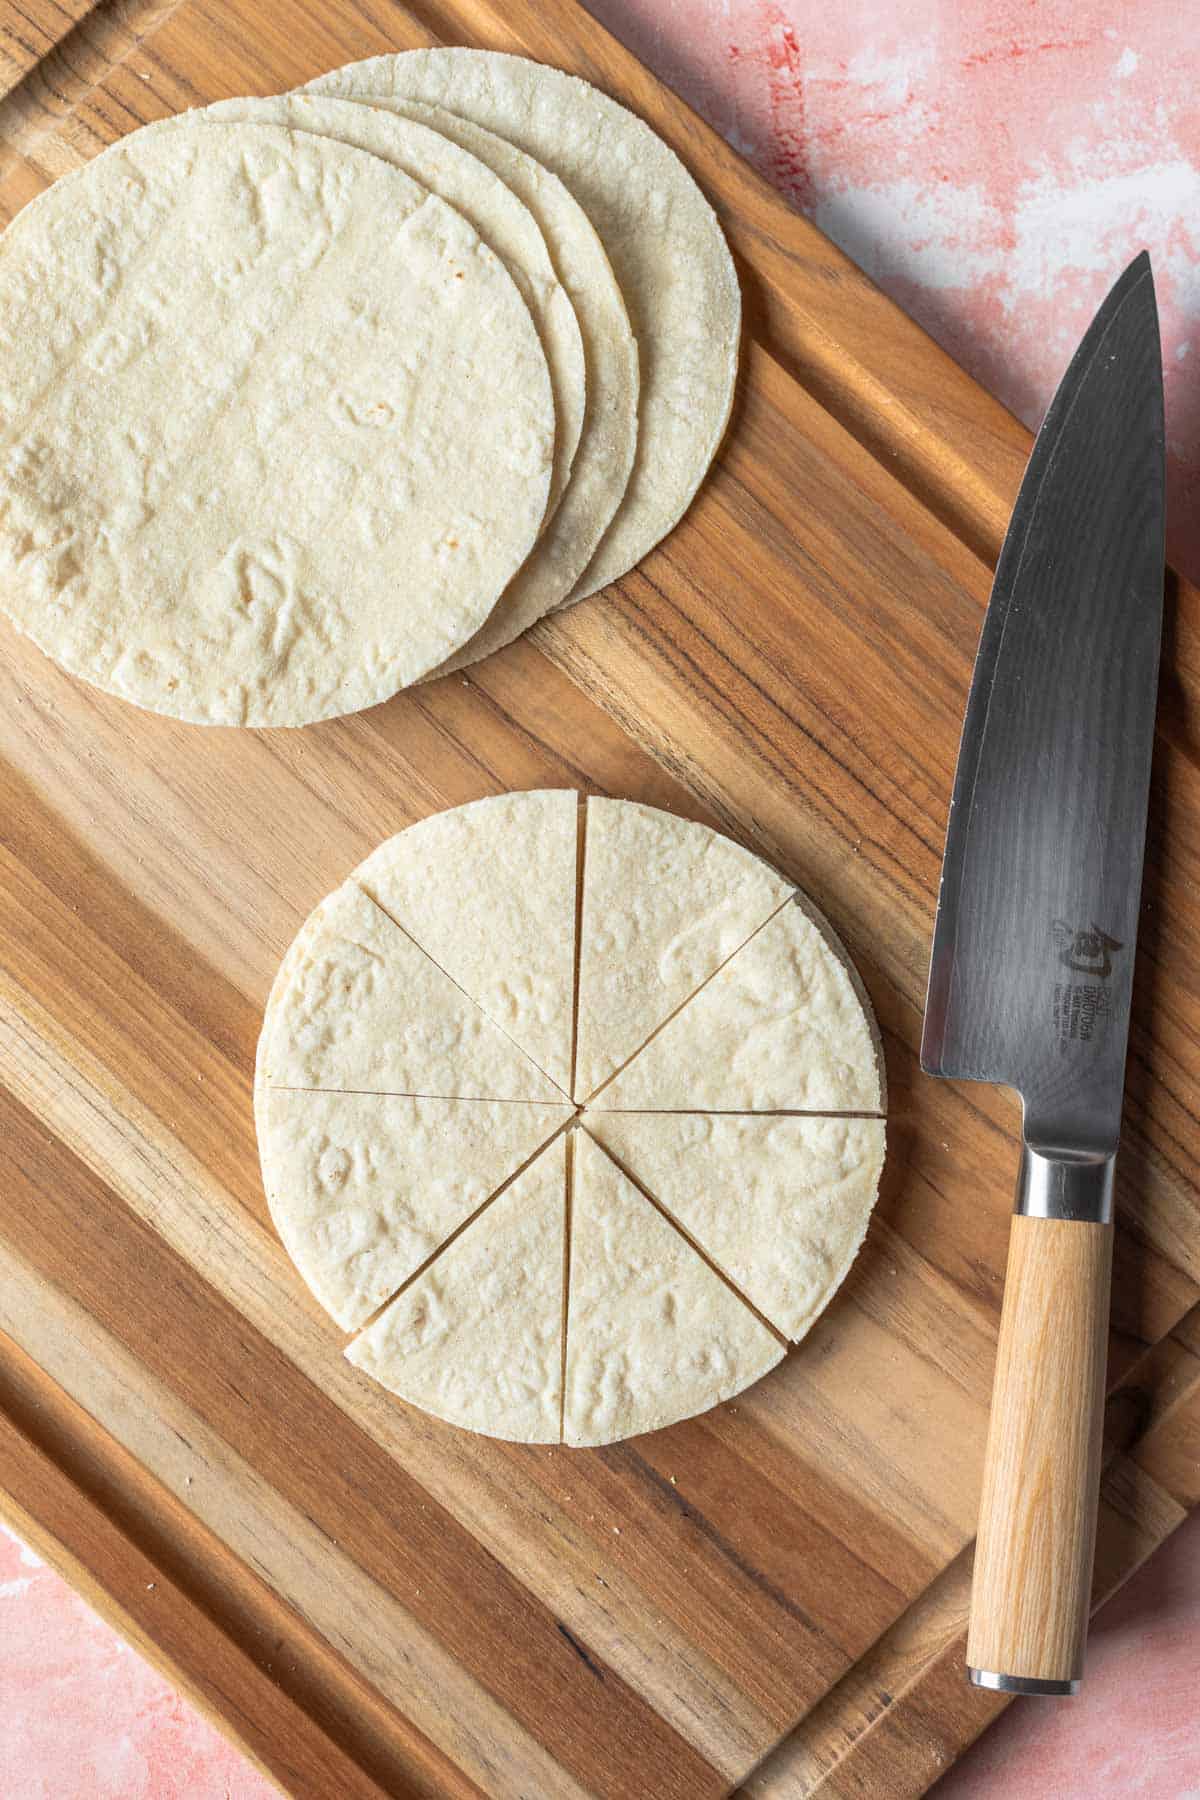 cutting the tortillas into wedges on a wooden board. 